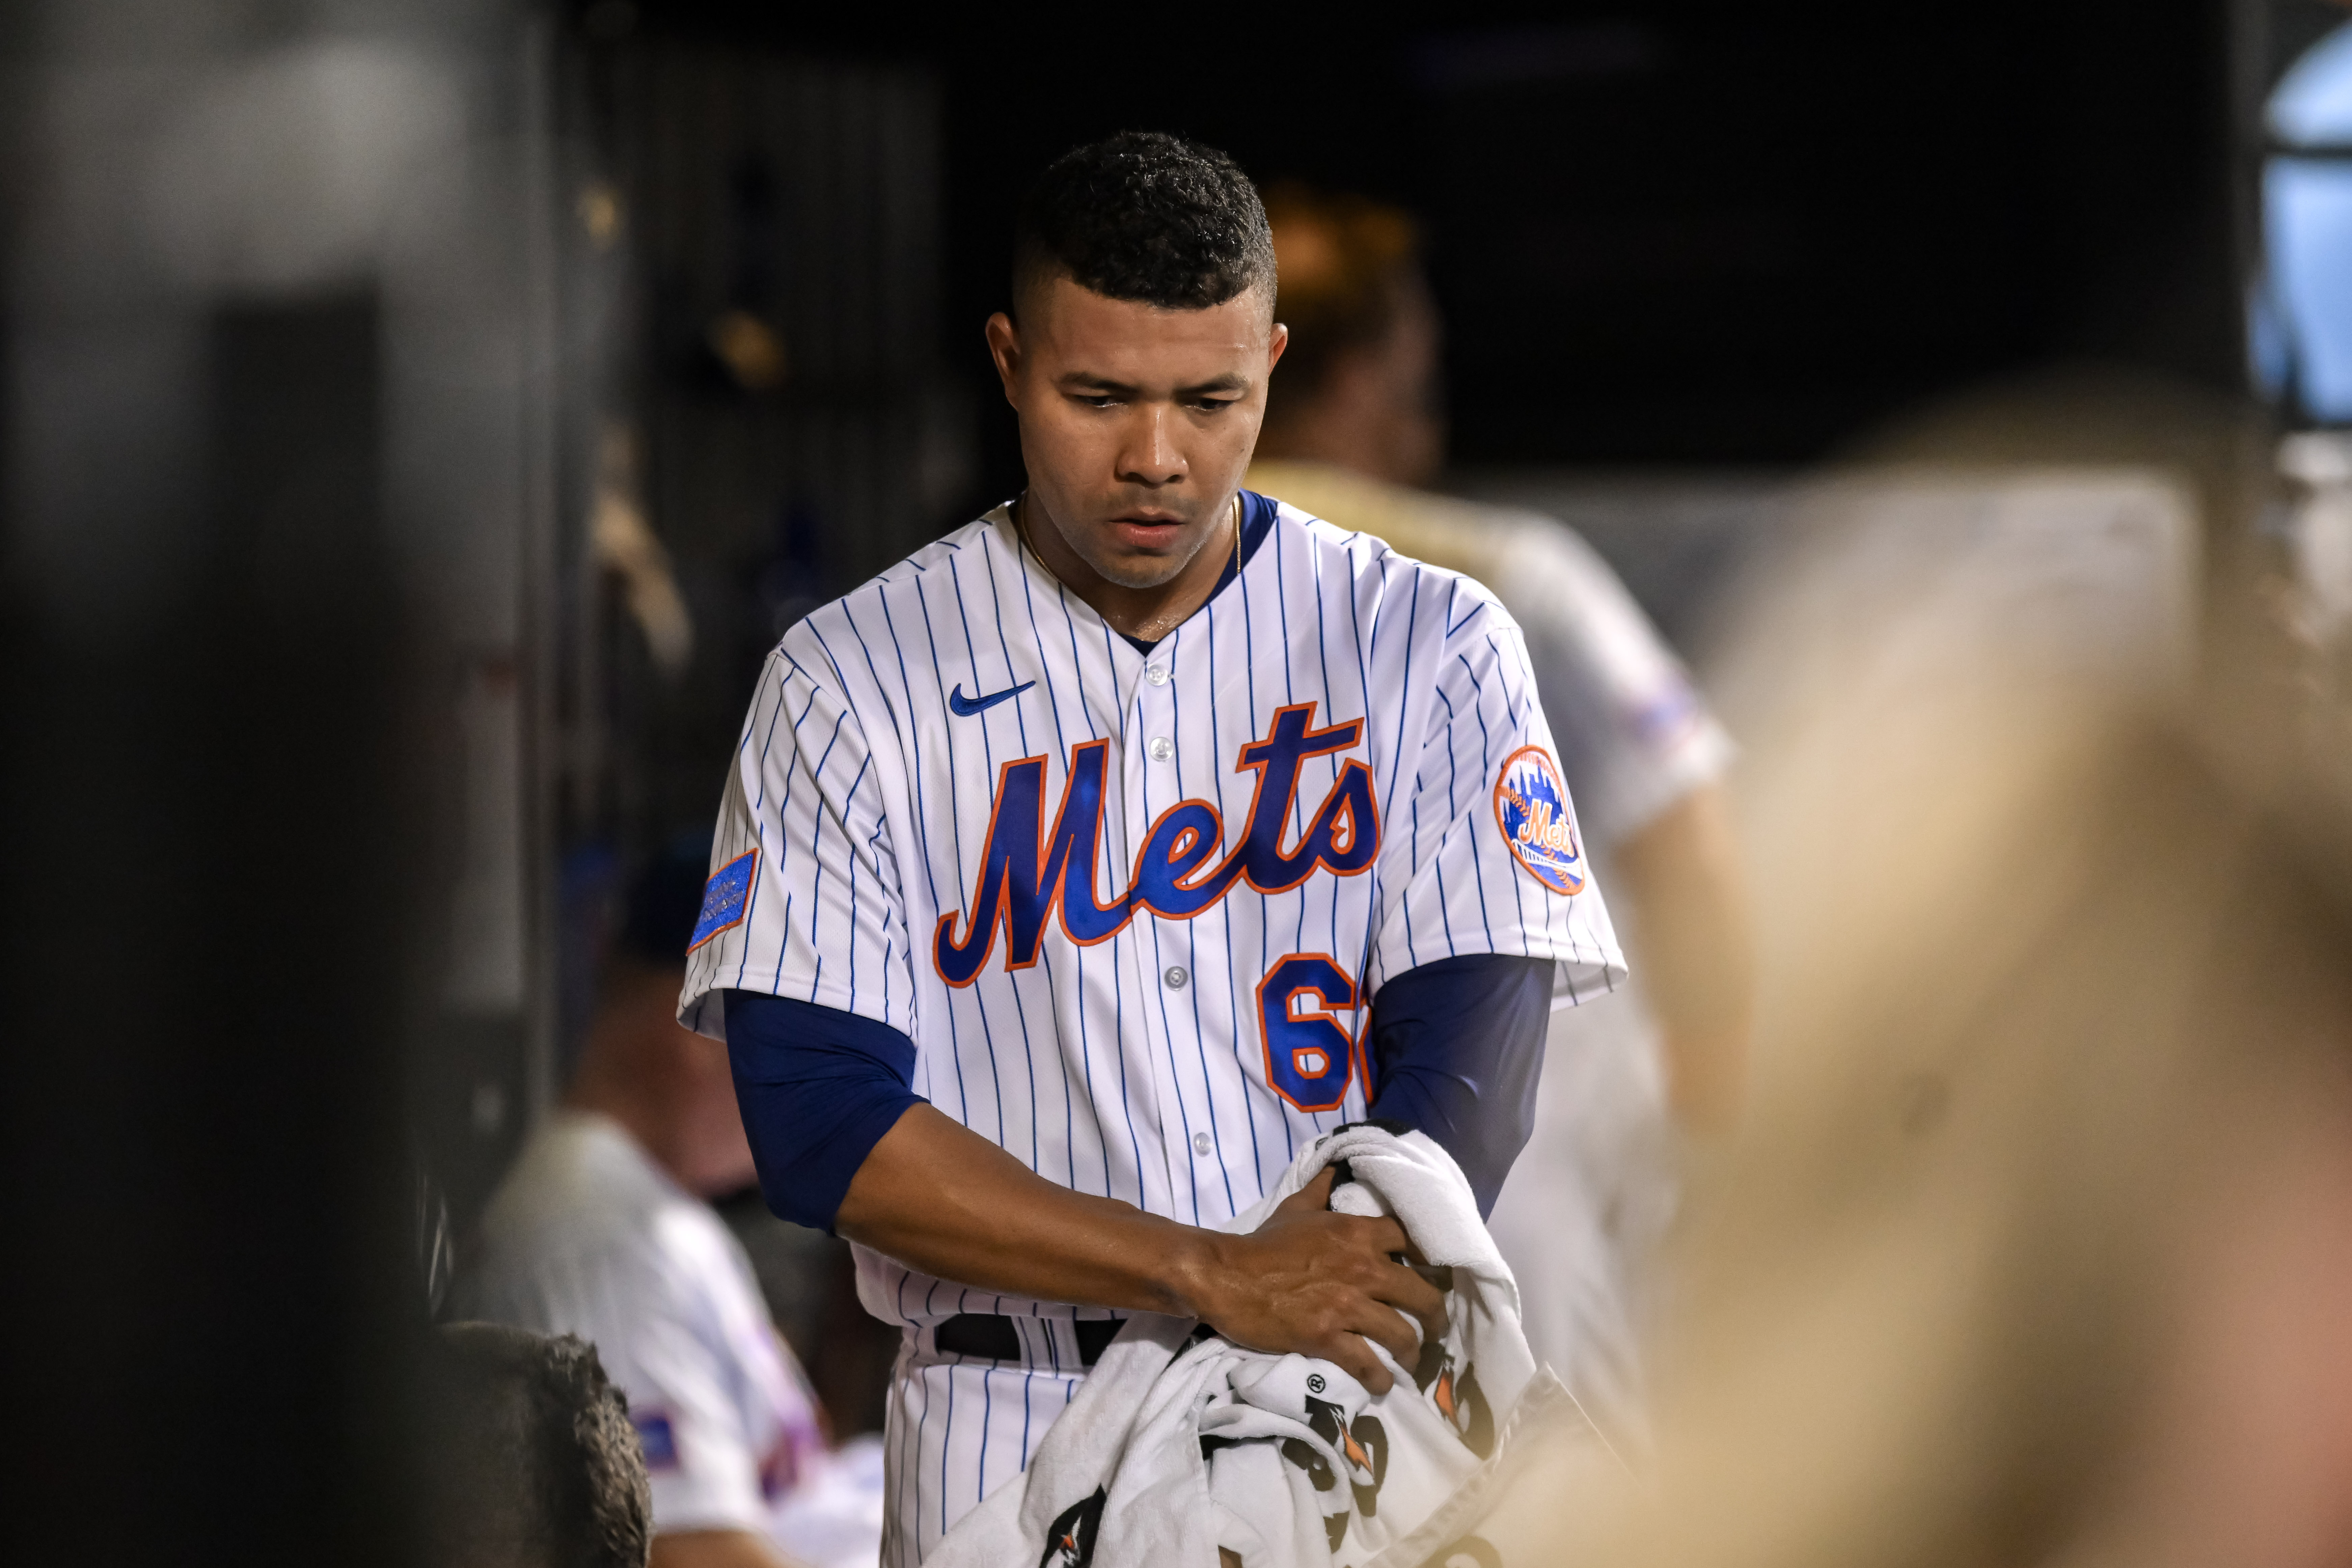 Mets claim stirring victory in opening game of doubleheader before